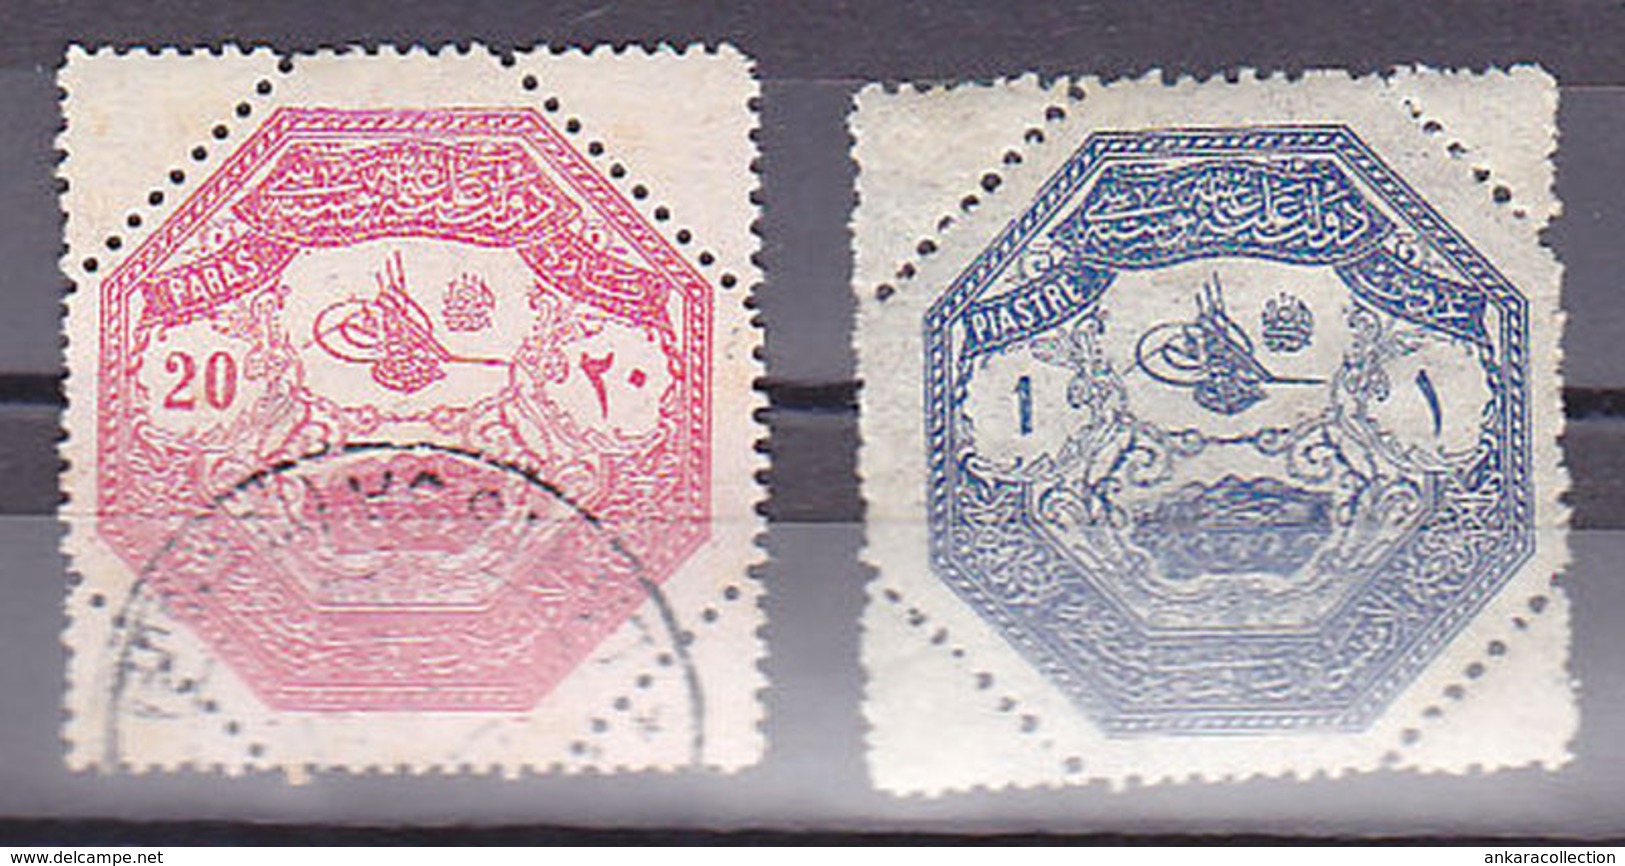 AC - TURKEY STAMPS  - POSTAGE STAMPS FOR THE ARMY IN THESSALY 1 & 20 PARA 21 APROL 1898 - Unused Stamps